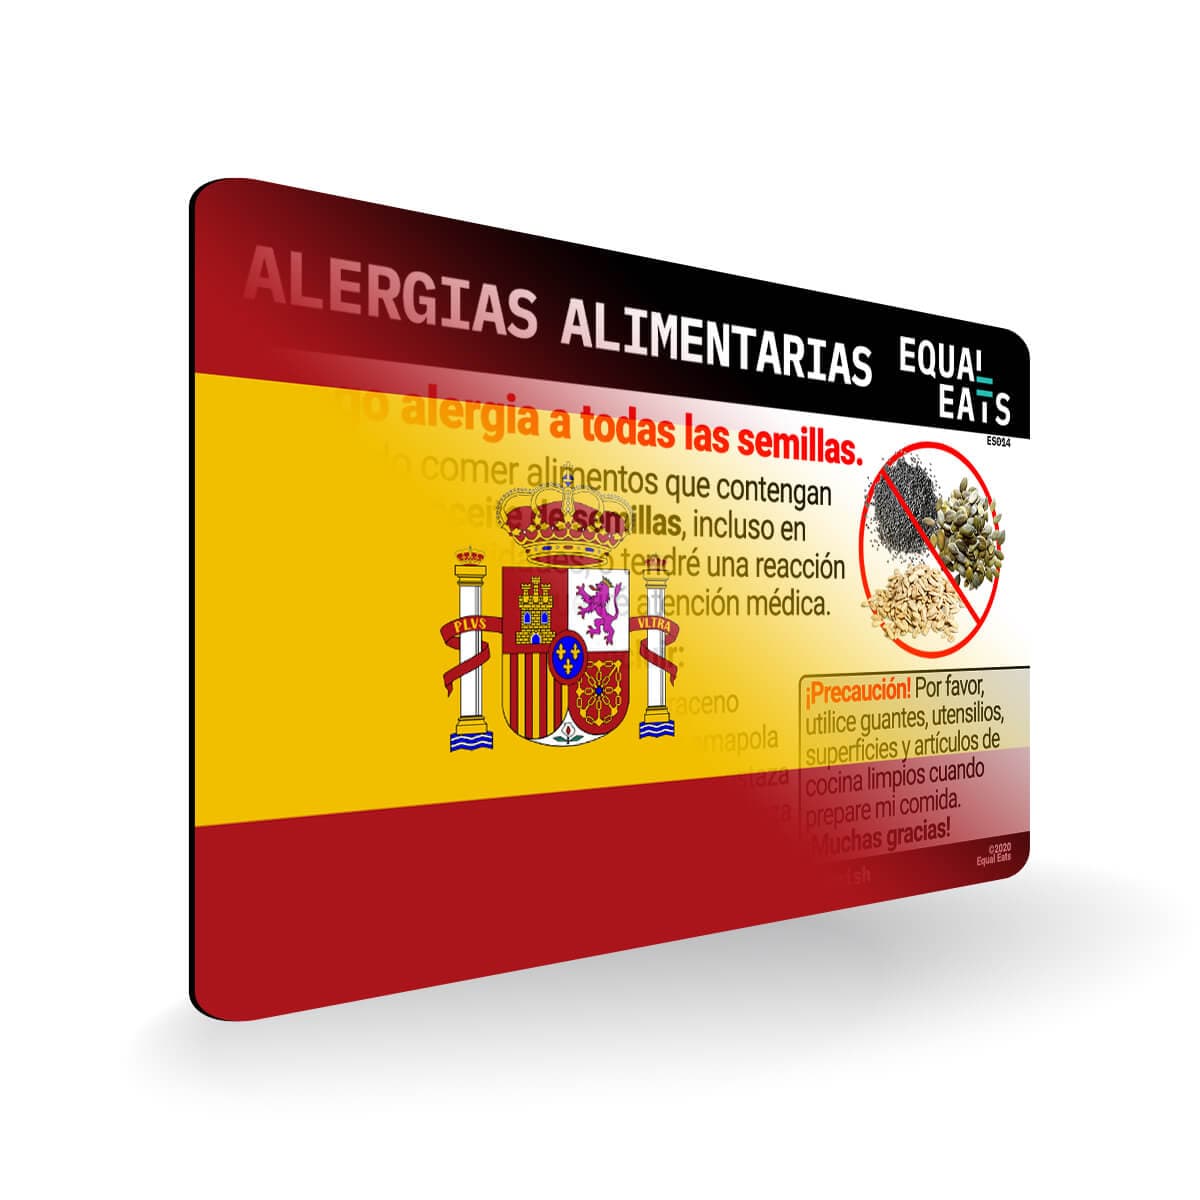 Seed Allergy in Spanish. Seed Allergy Card for Spain